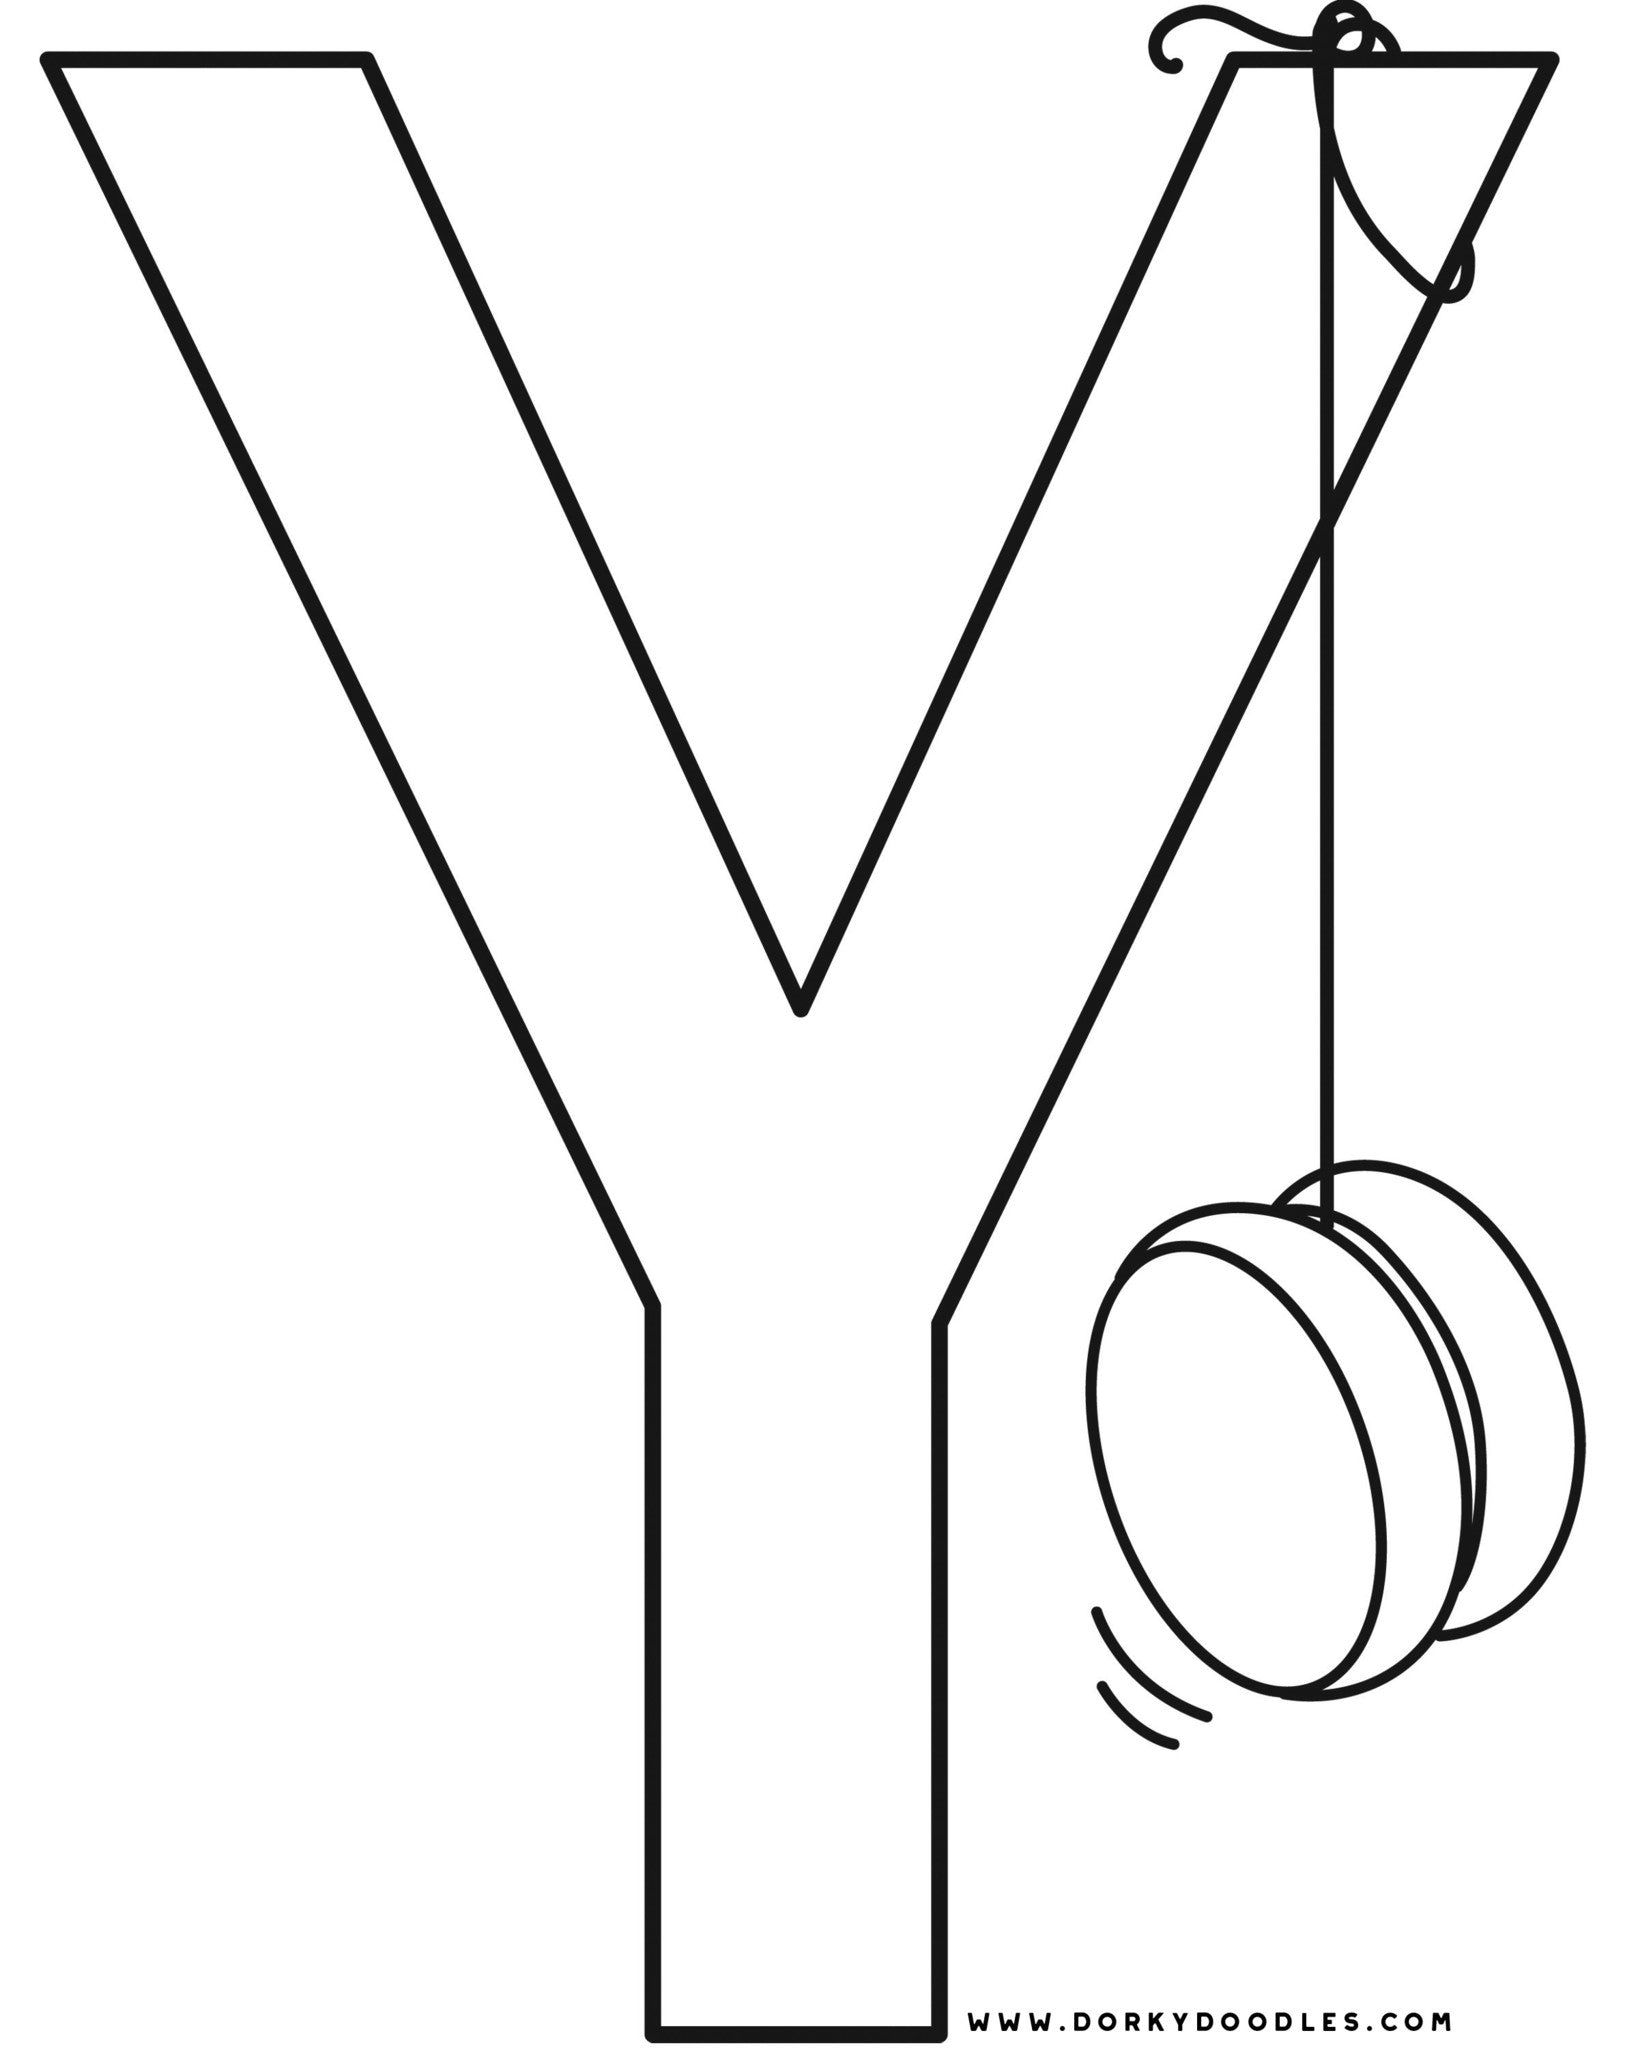 y-coloring-pages-free-download-gmbar-co